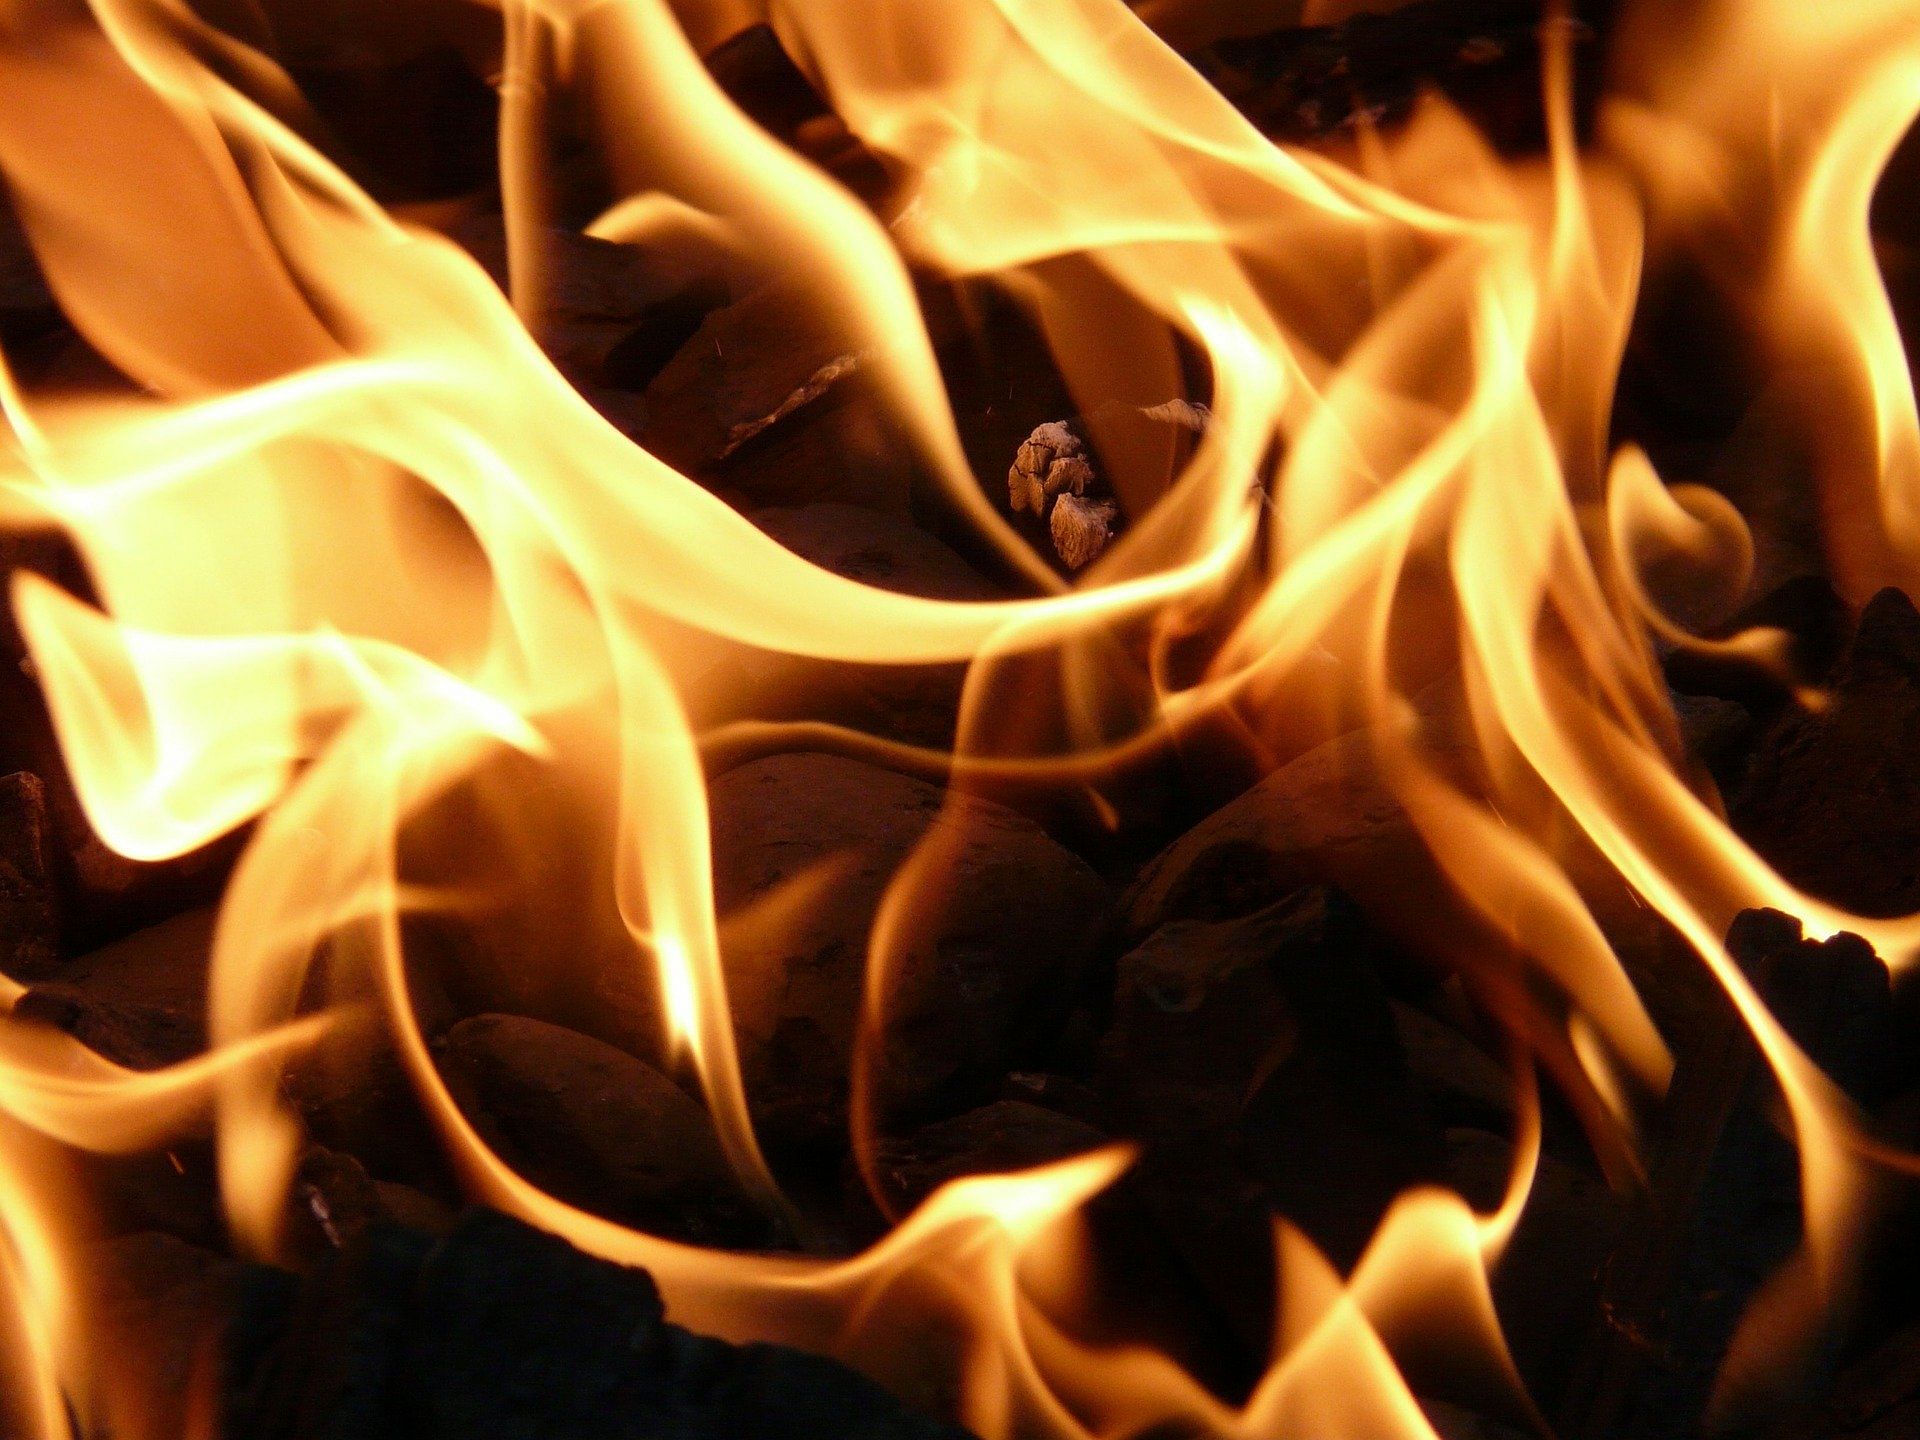 Jyotappa was lying on the ground with 95% burns when passersby rushed him to hospital. Representative image/Pixabay